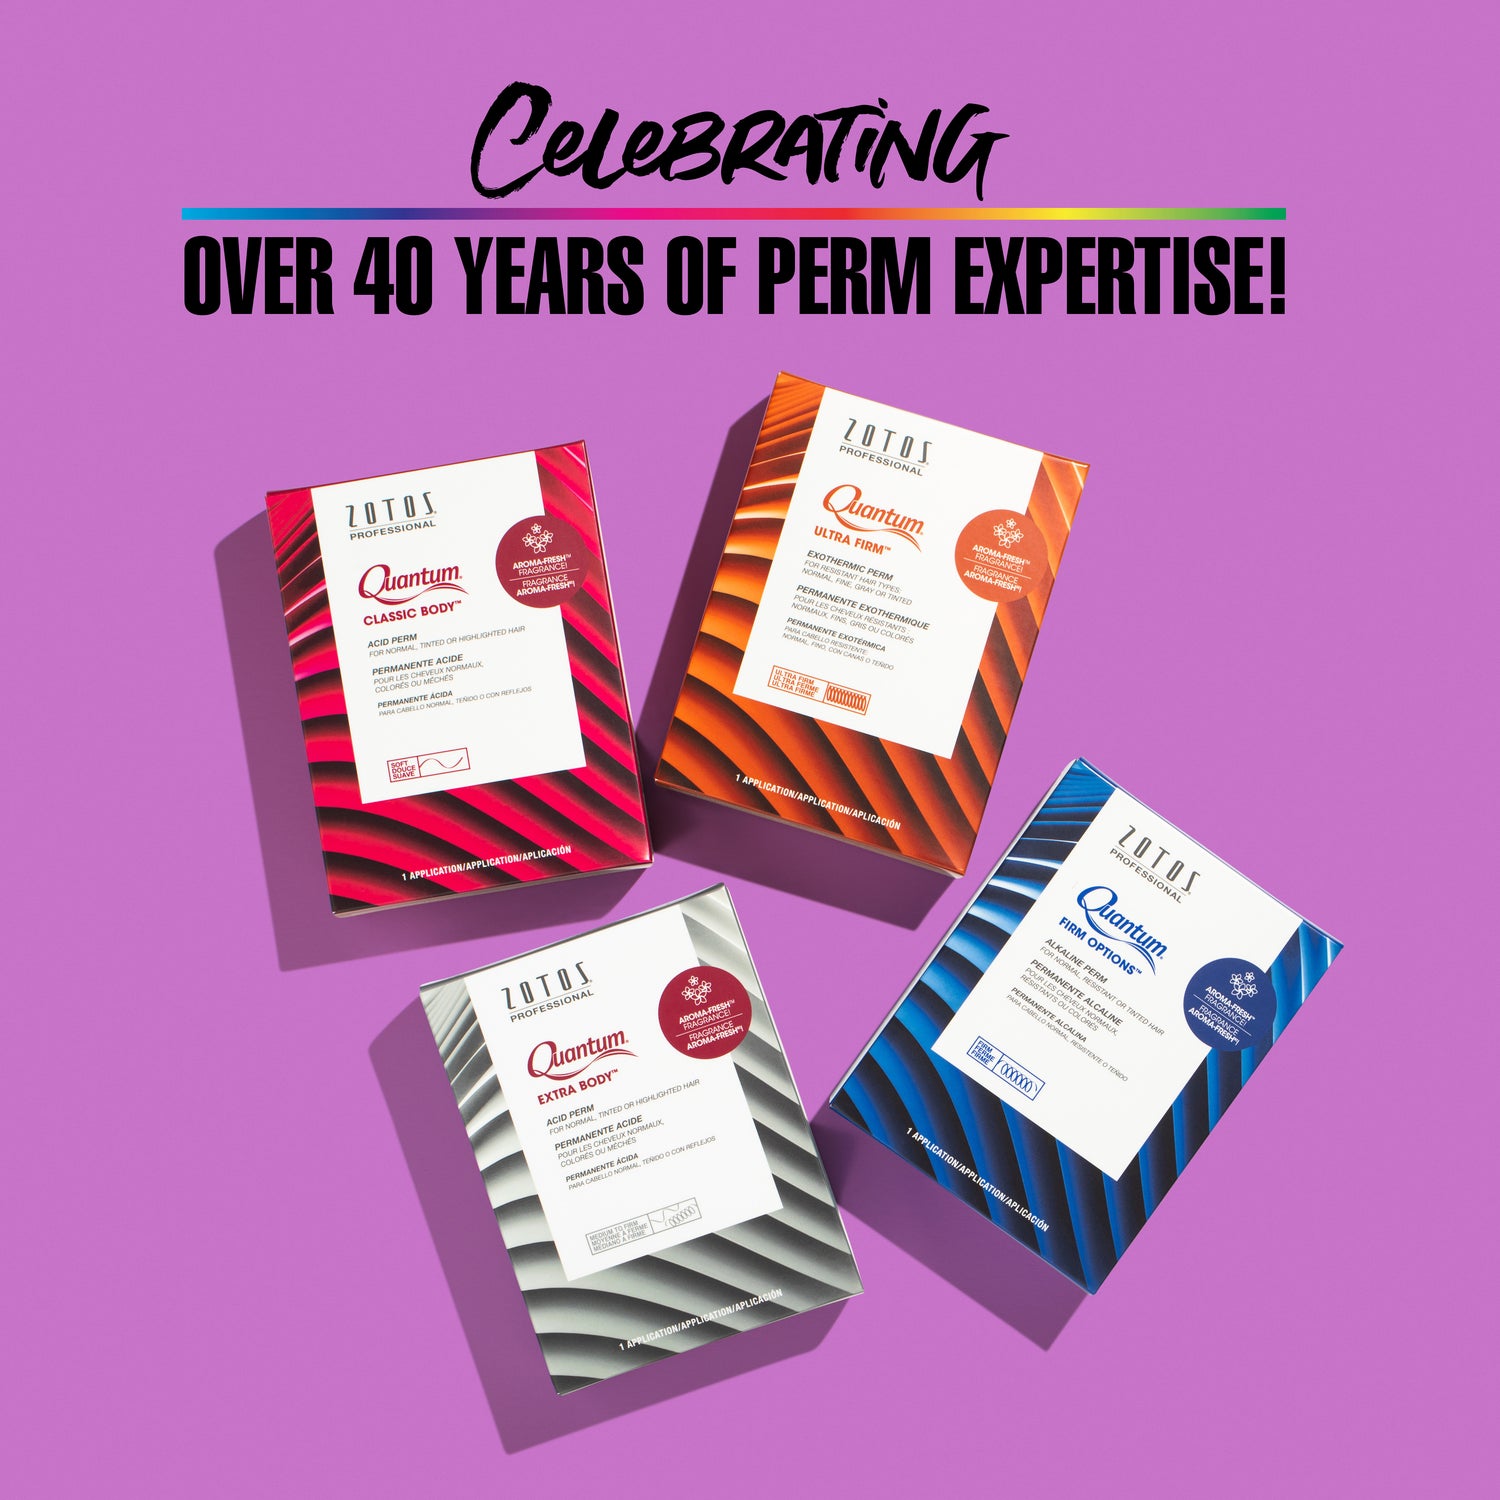 Celebrating over 40 years of perm expertise!